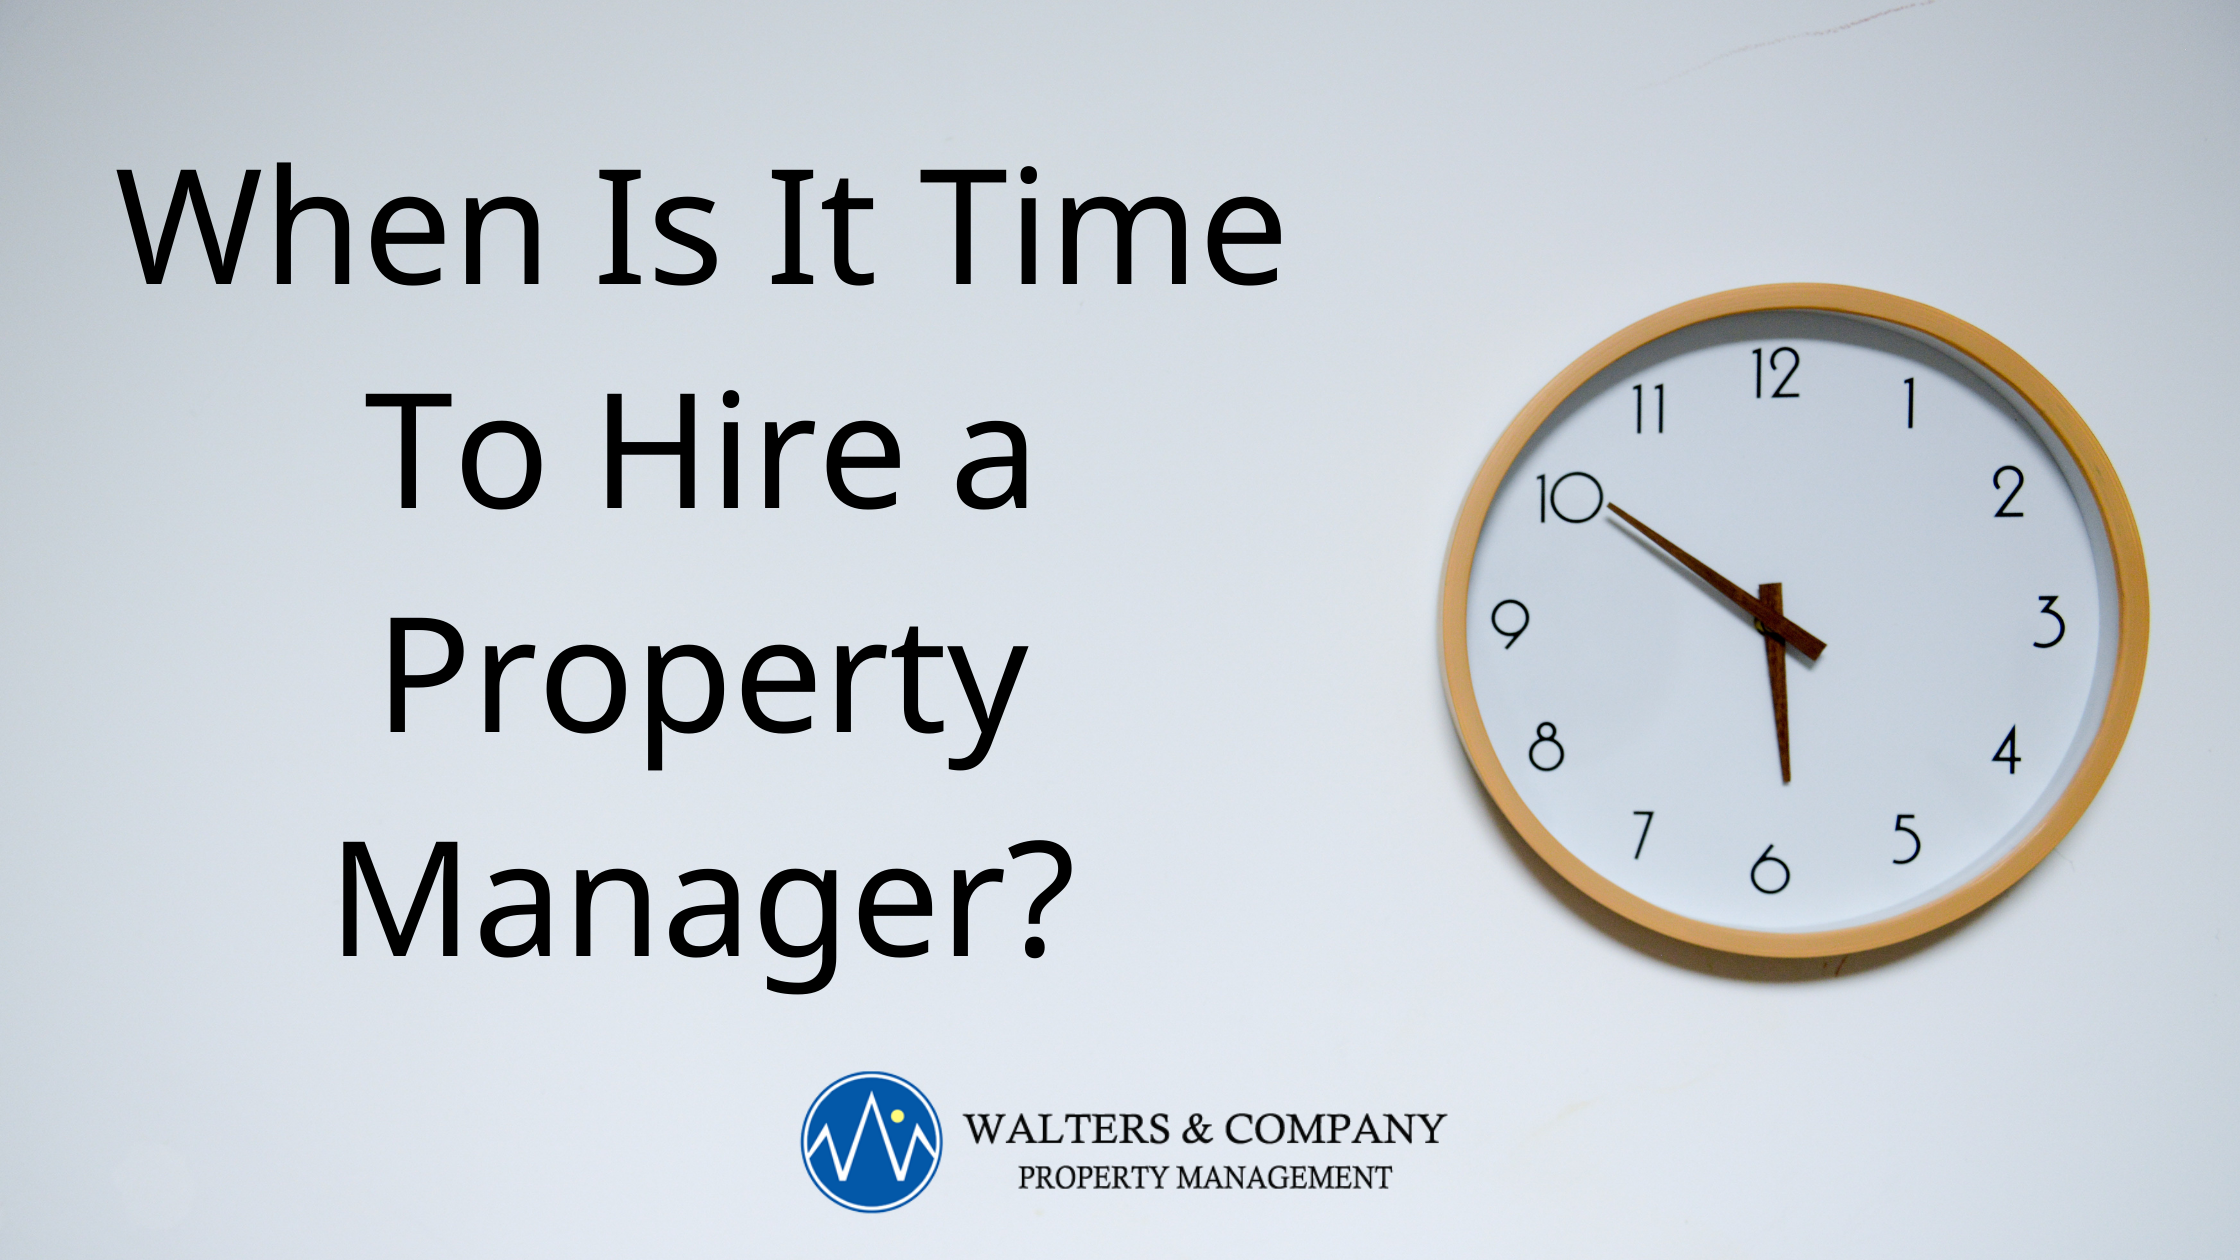 Do I need a Property Manager?